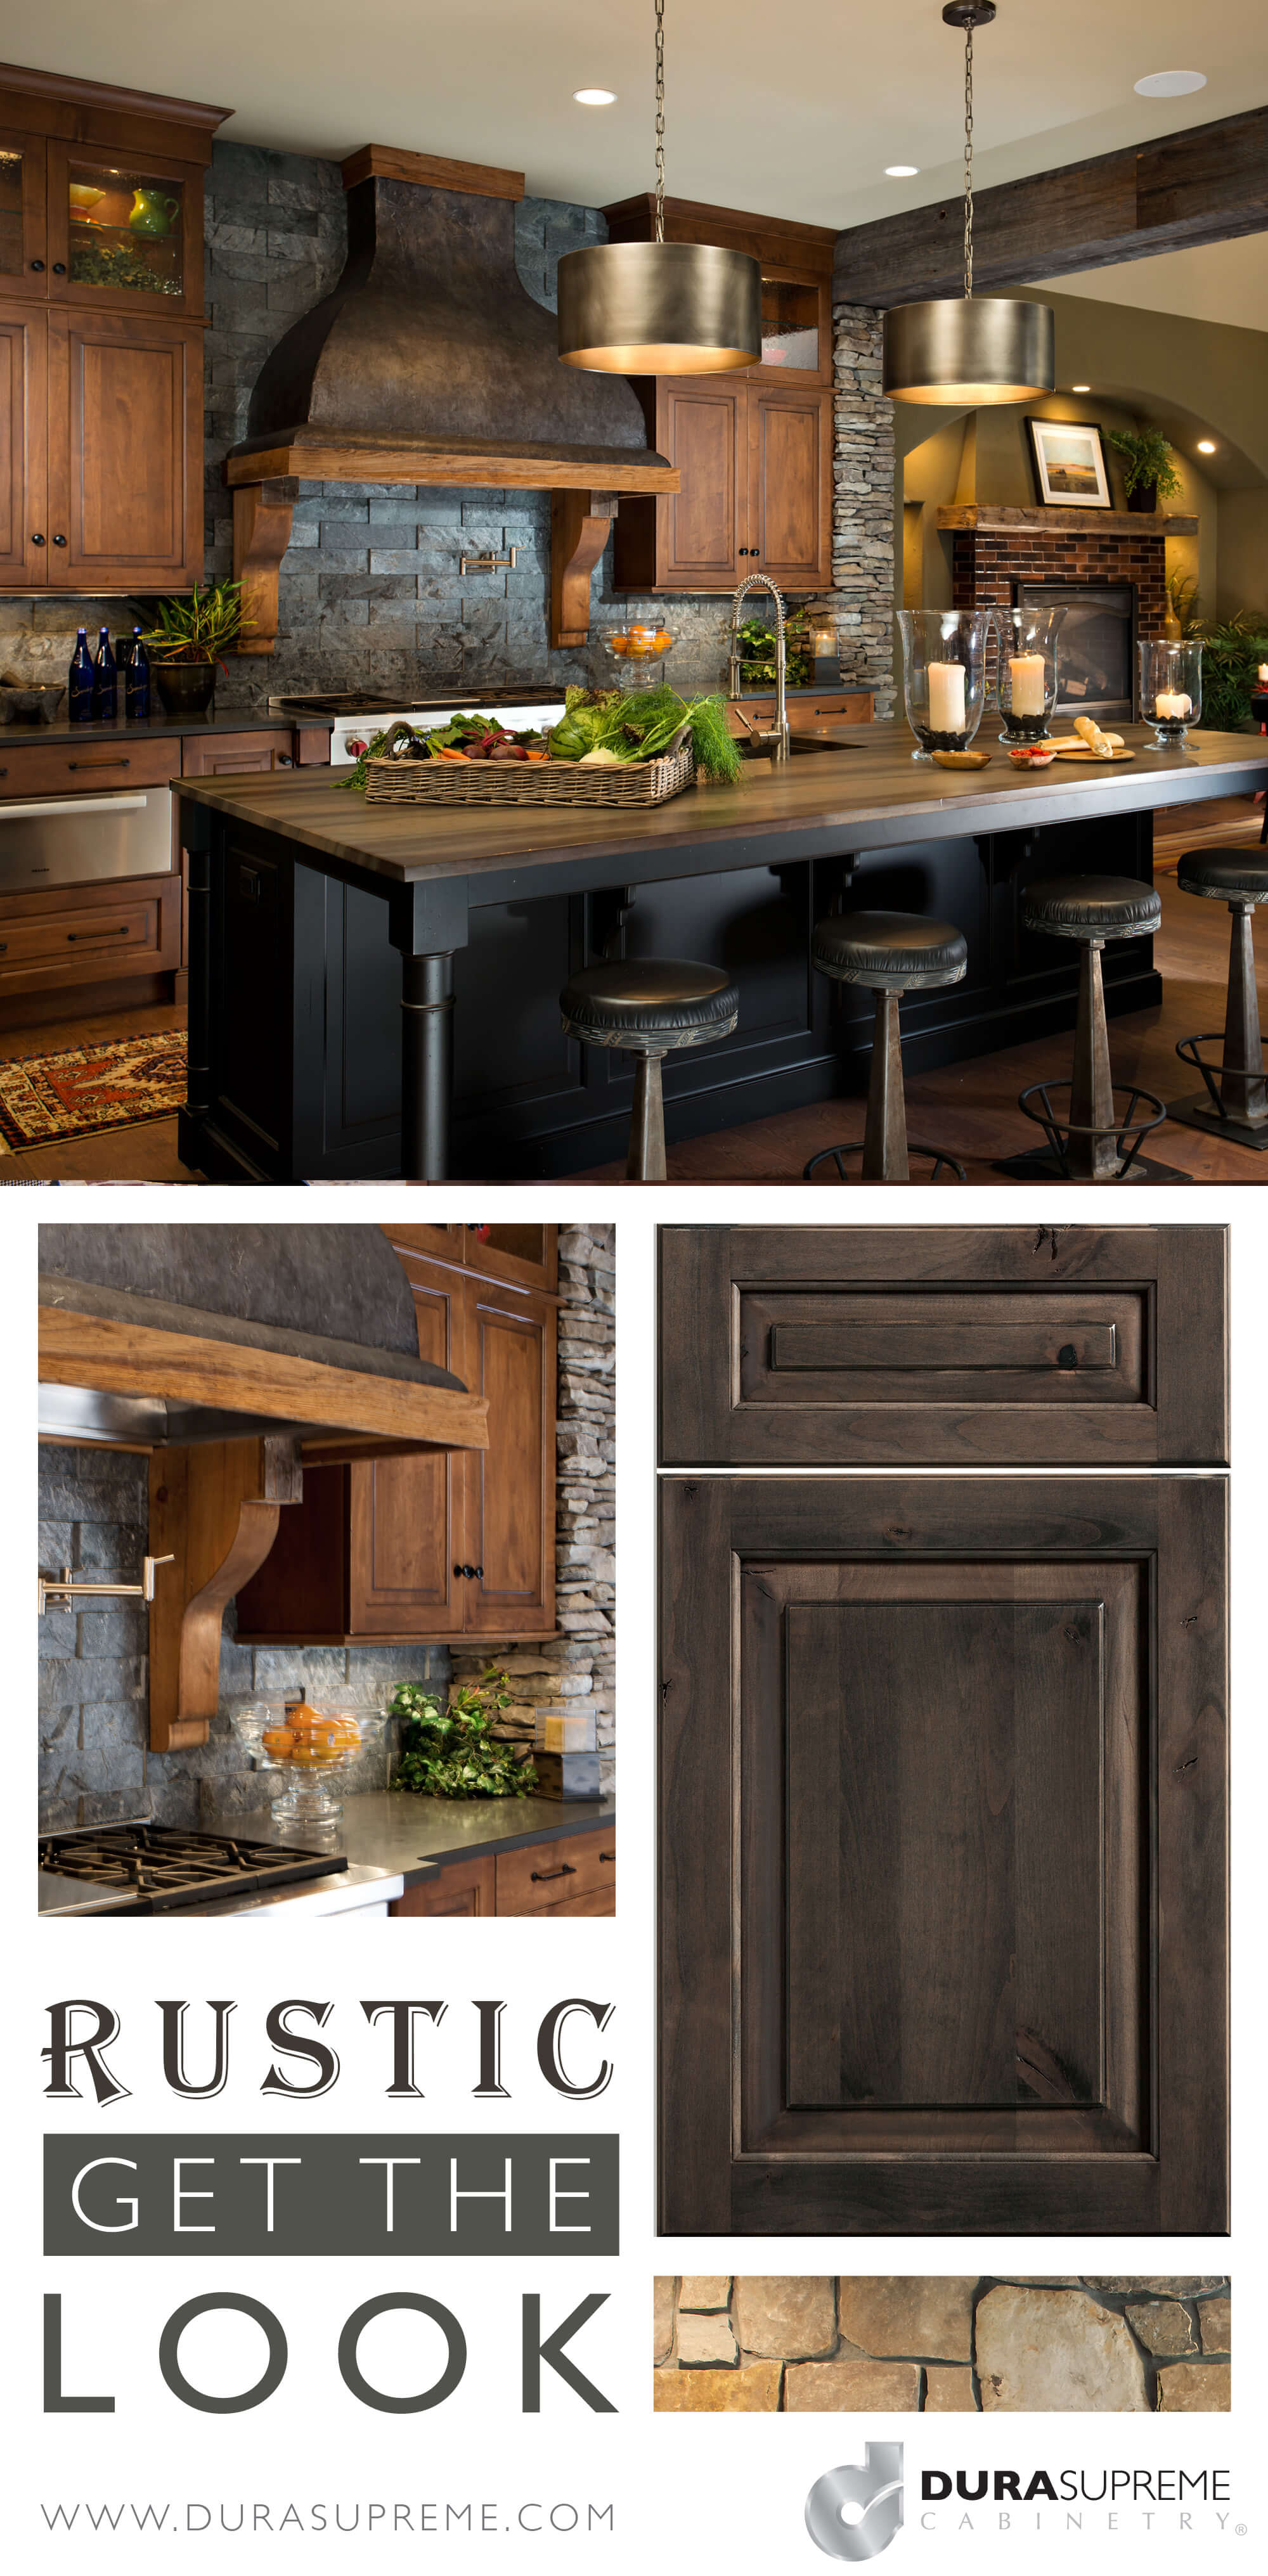 Rustic Style kitchen design ideas. How to create rustic style cabinets.